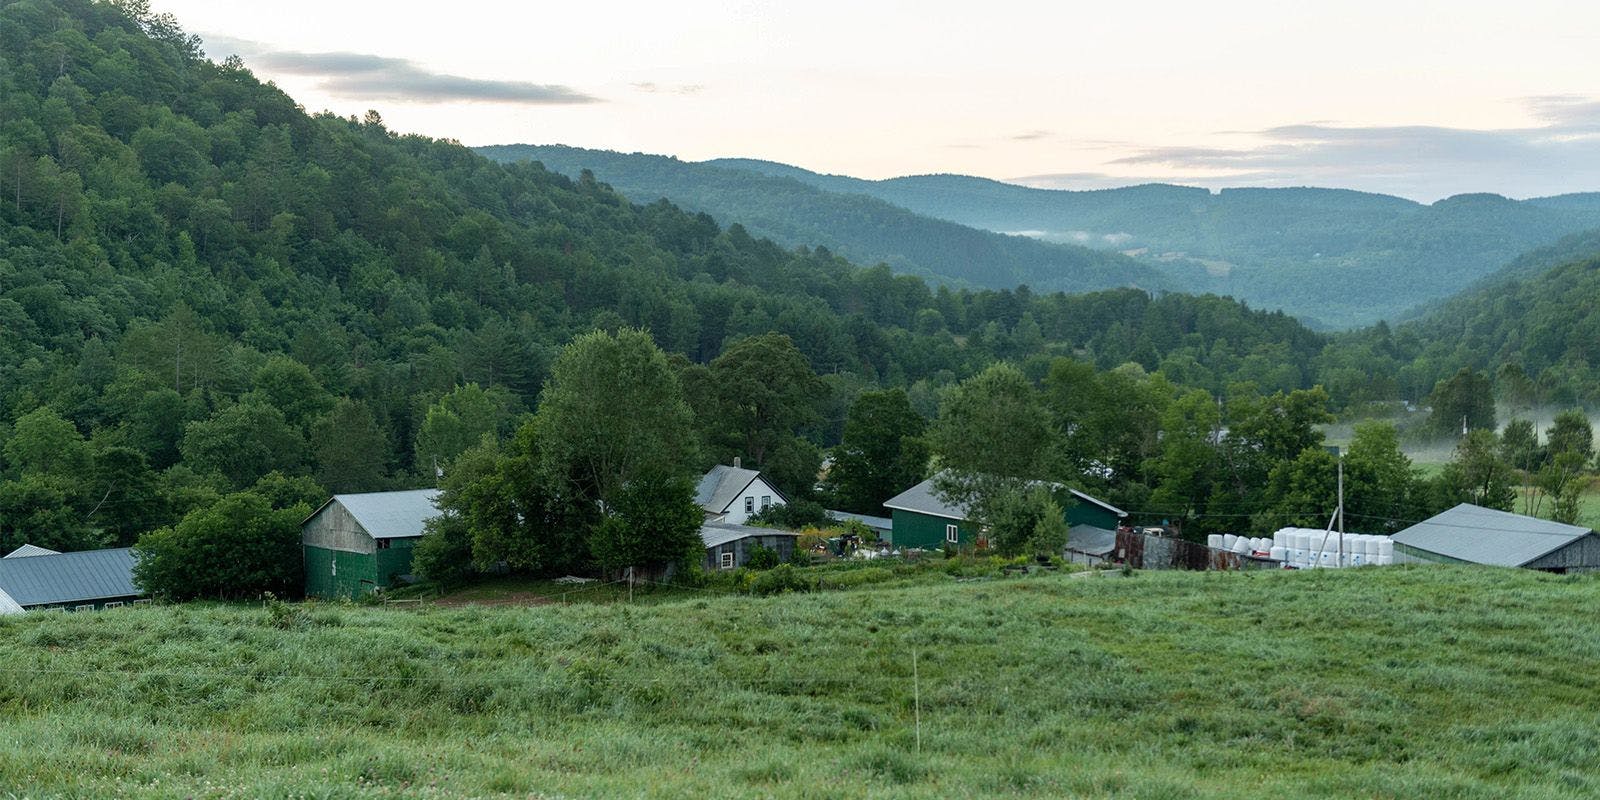 A house and barns at the Rory family organic farm in Vermont are shown from atop a hill.